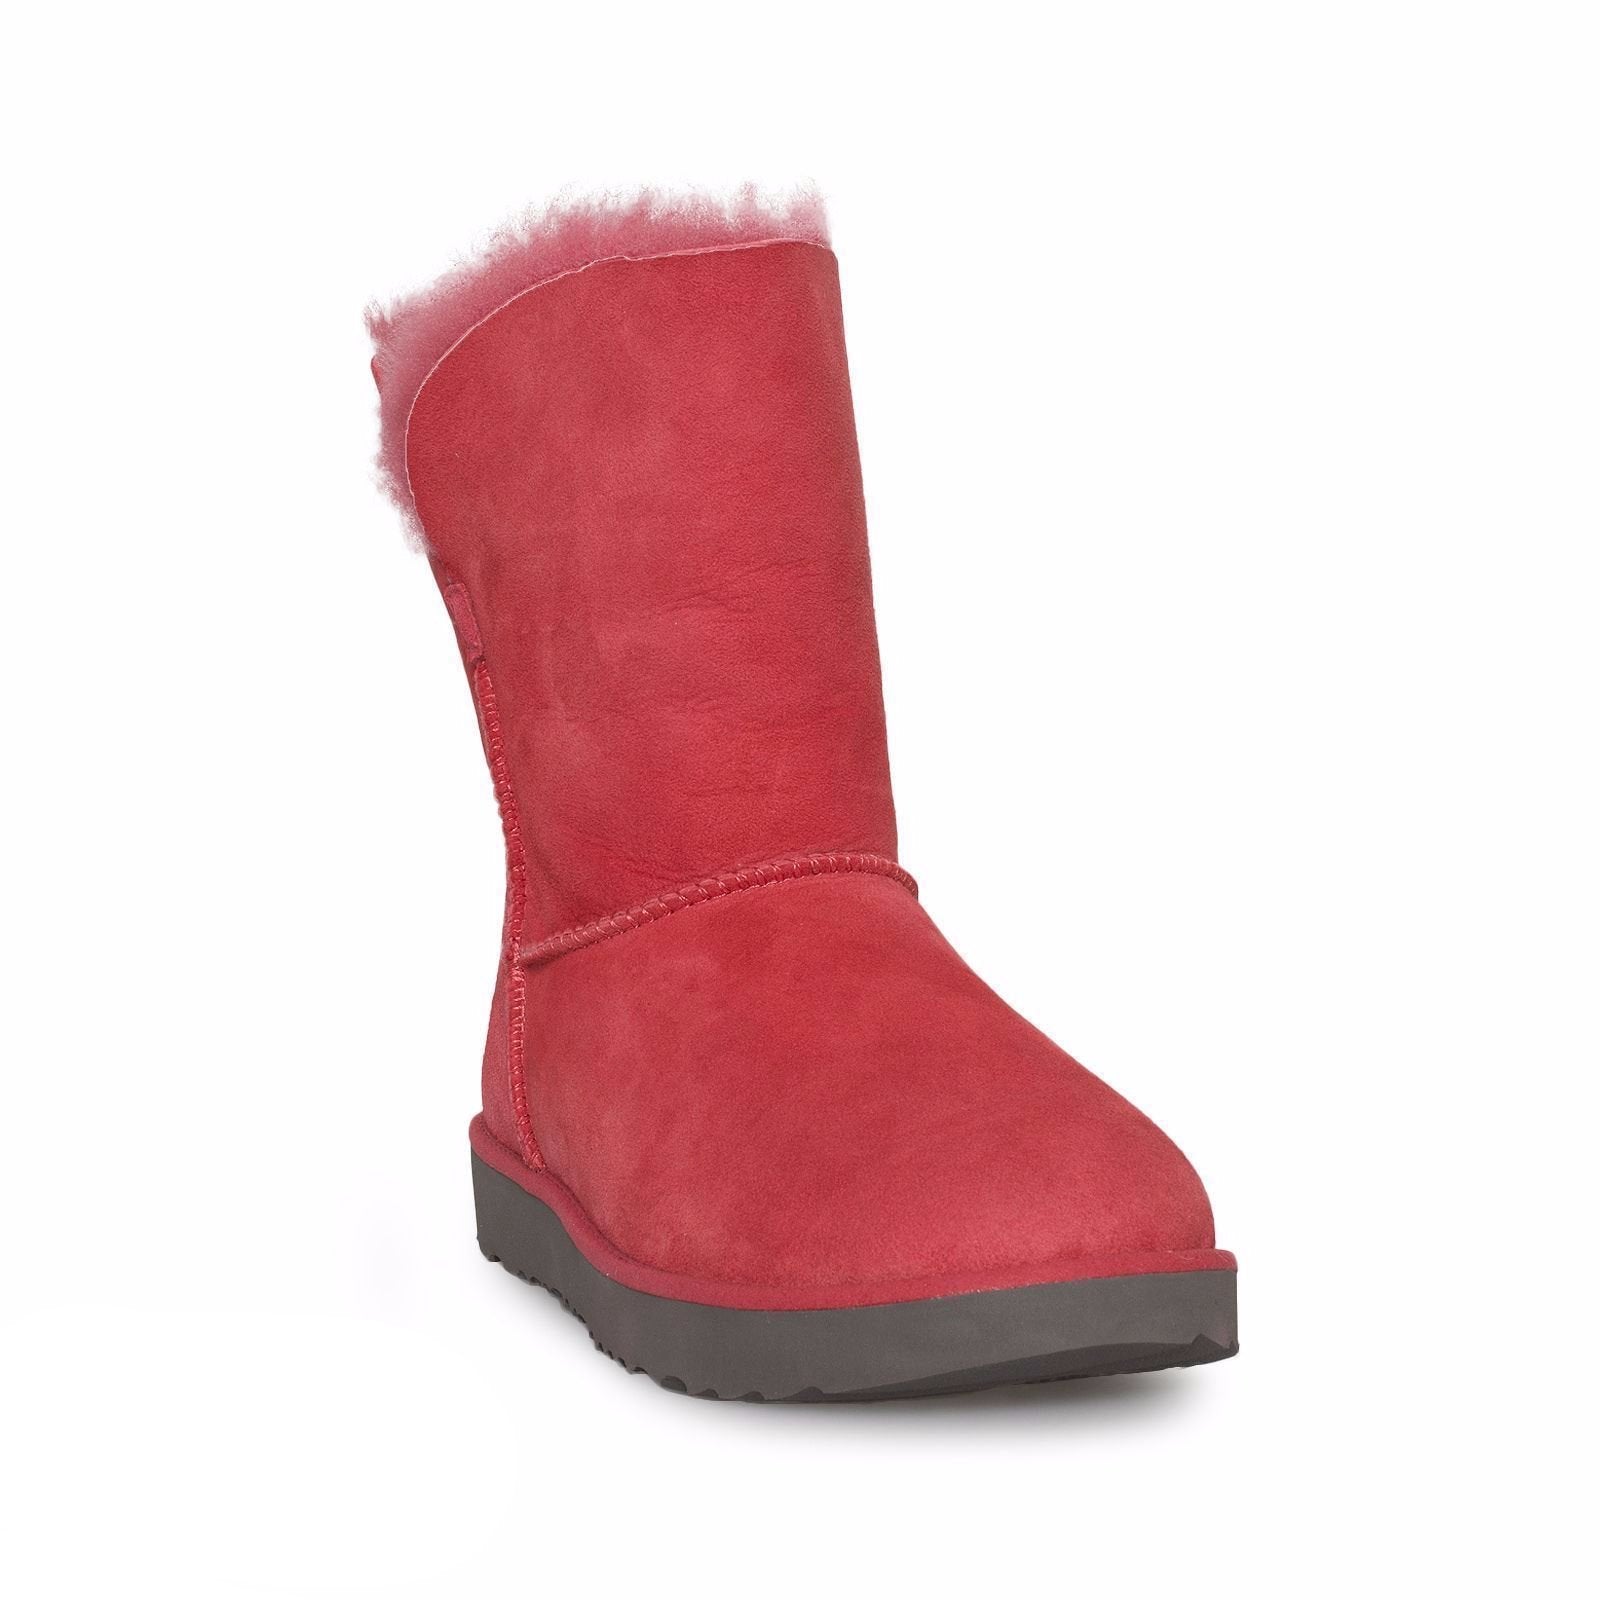 UGG Classic Cuff Short Lipstick Red Boots - MyCozyBoots